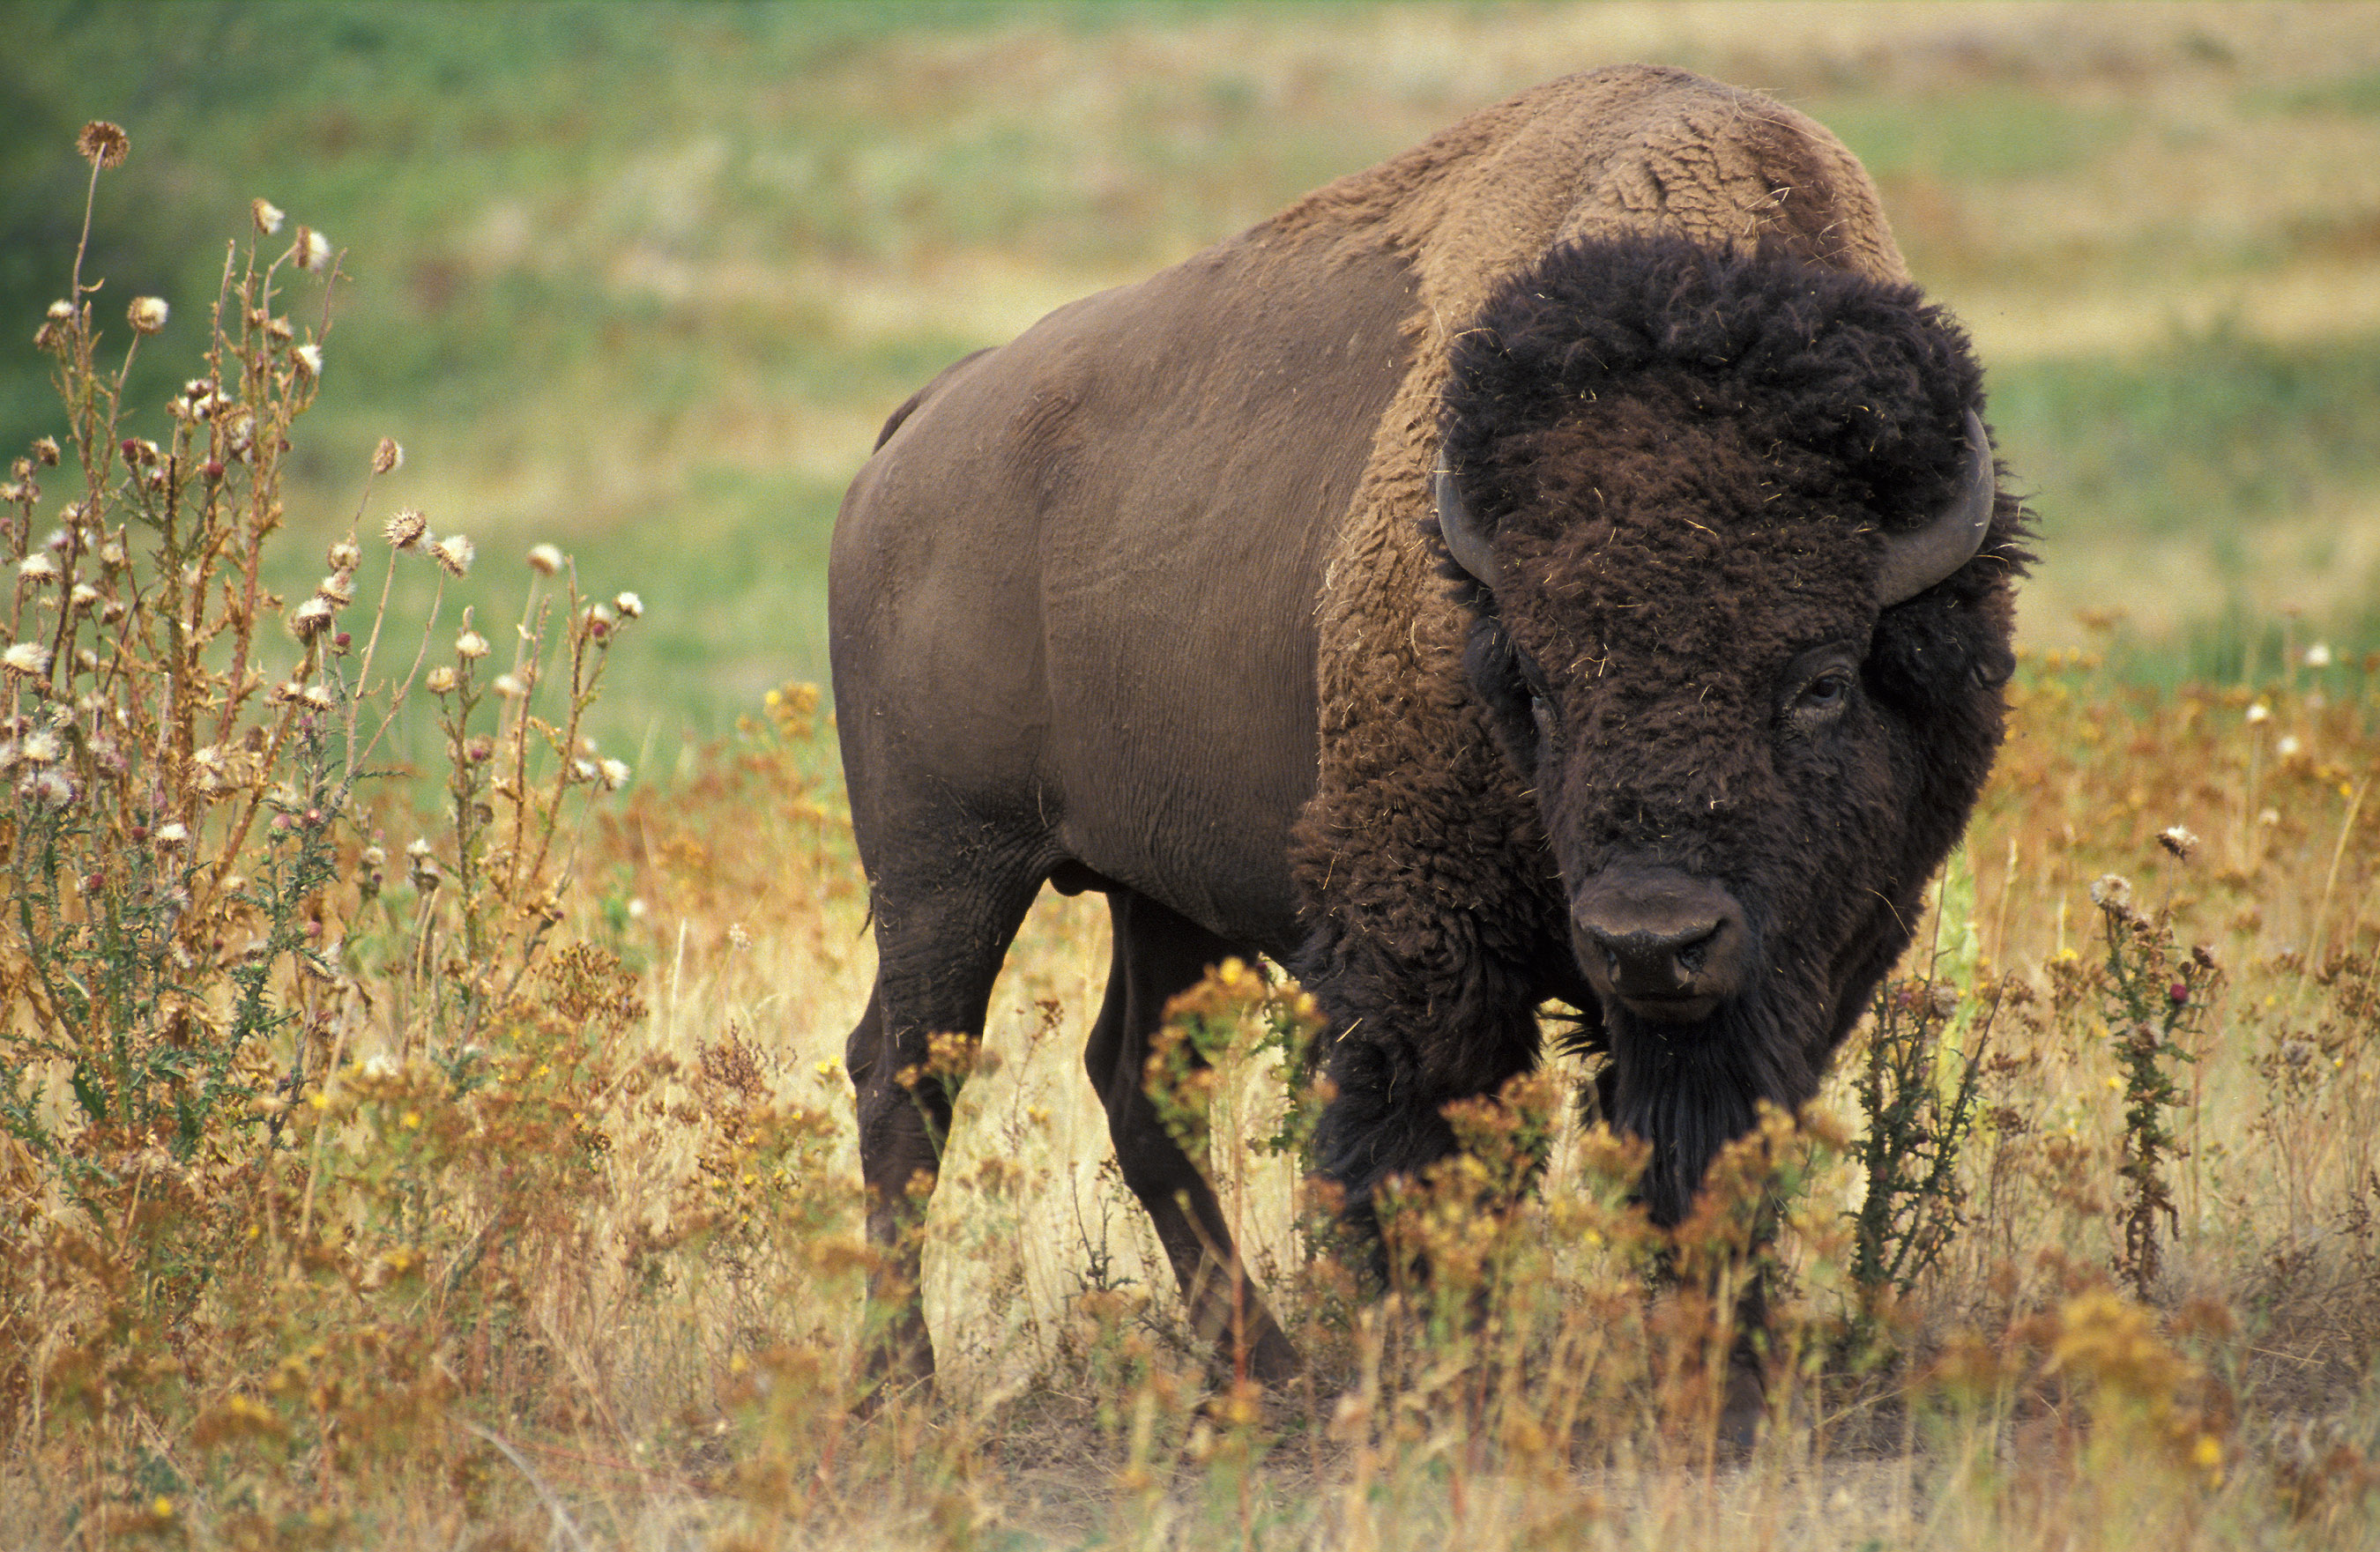 Bison to become official national symbol of U.S. | ShareAmerica